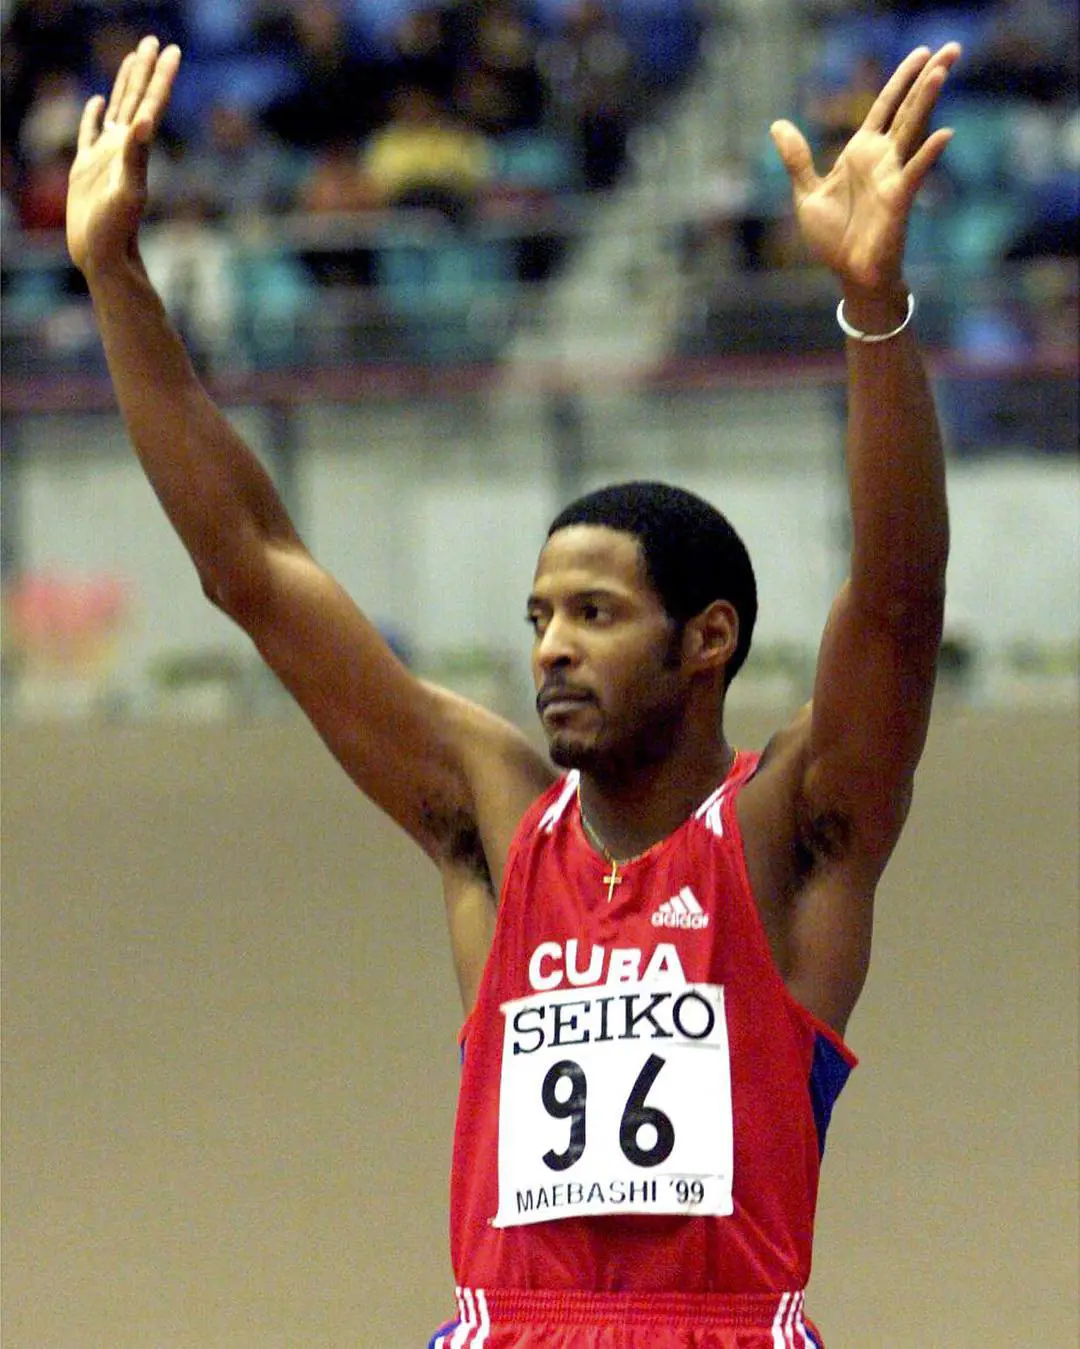 Javier Sotomayor acknowledges the crowd as he gets ready for his leap 